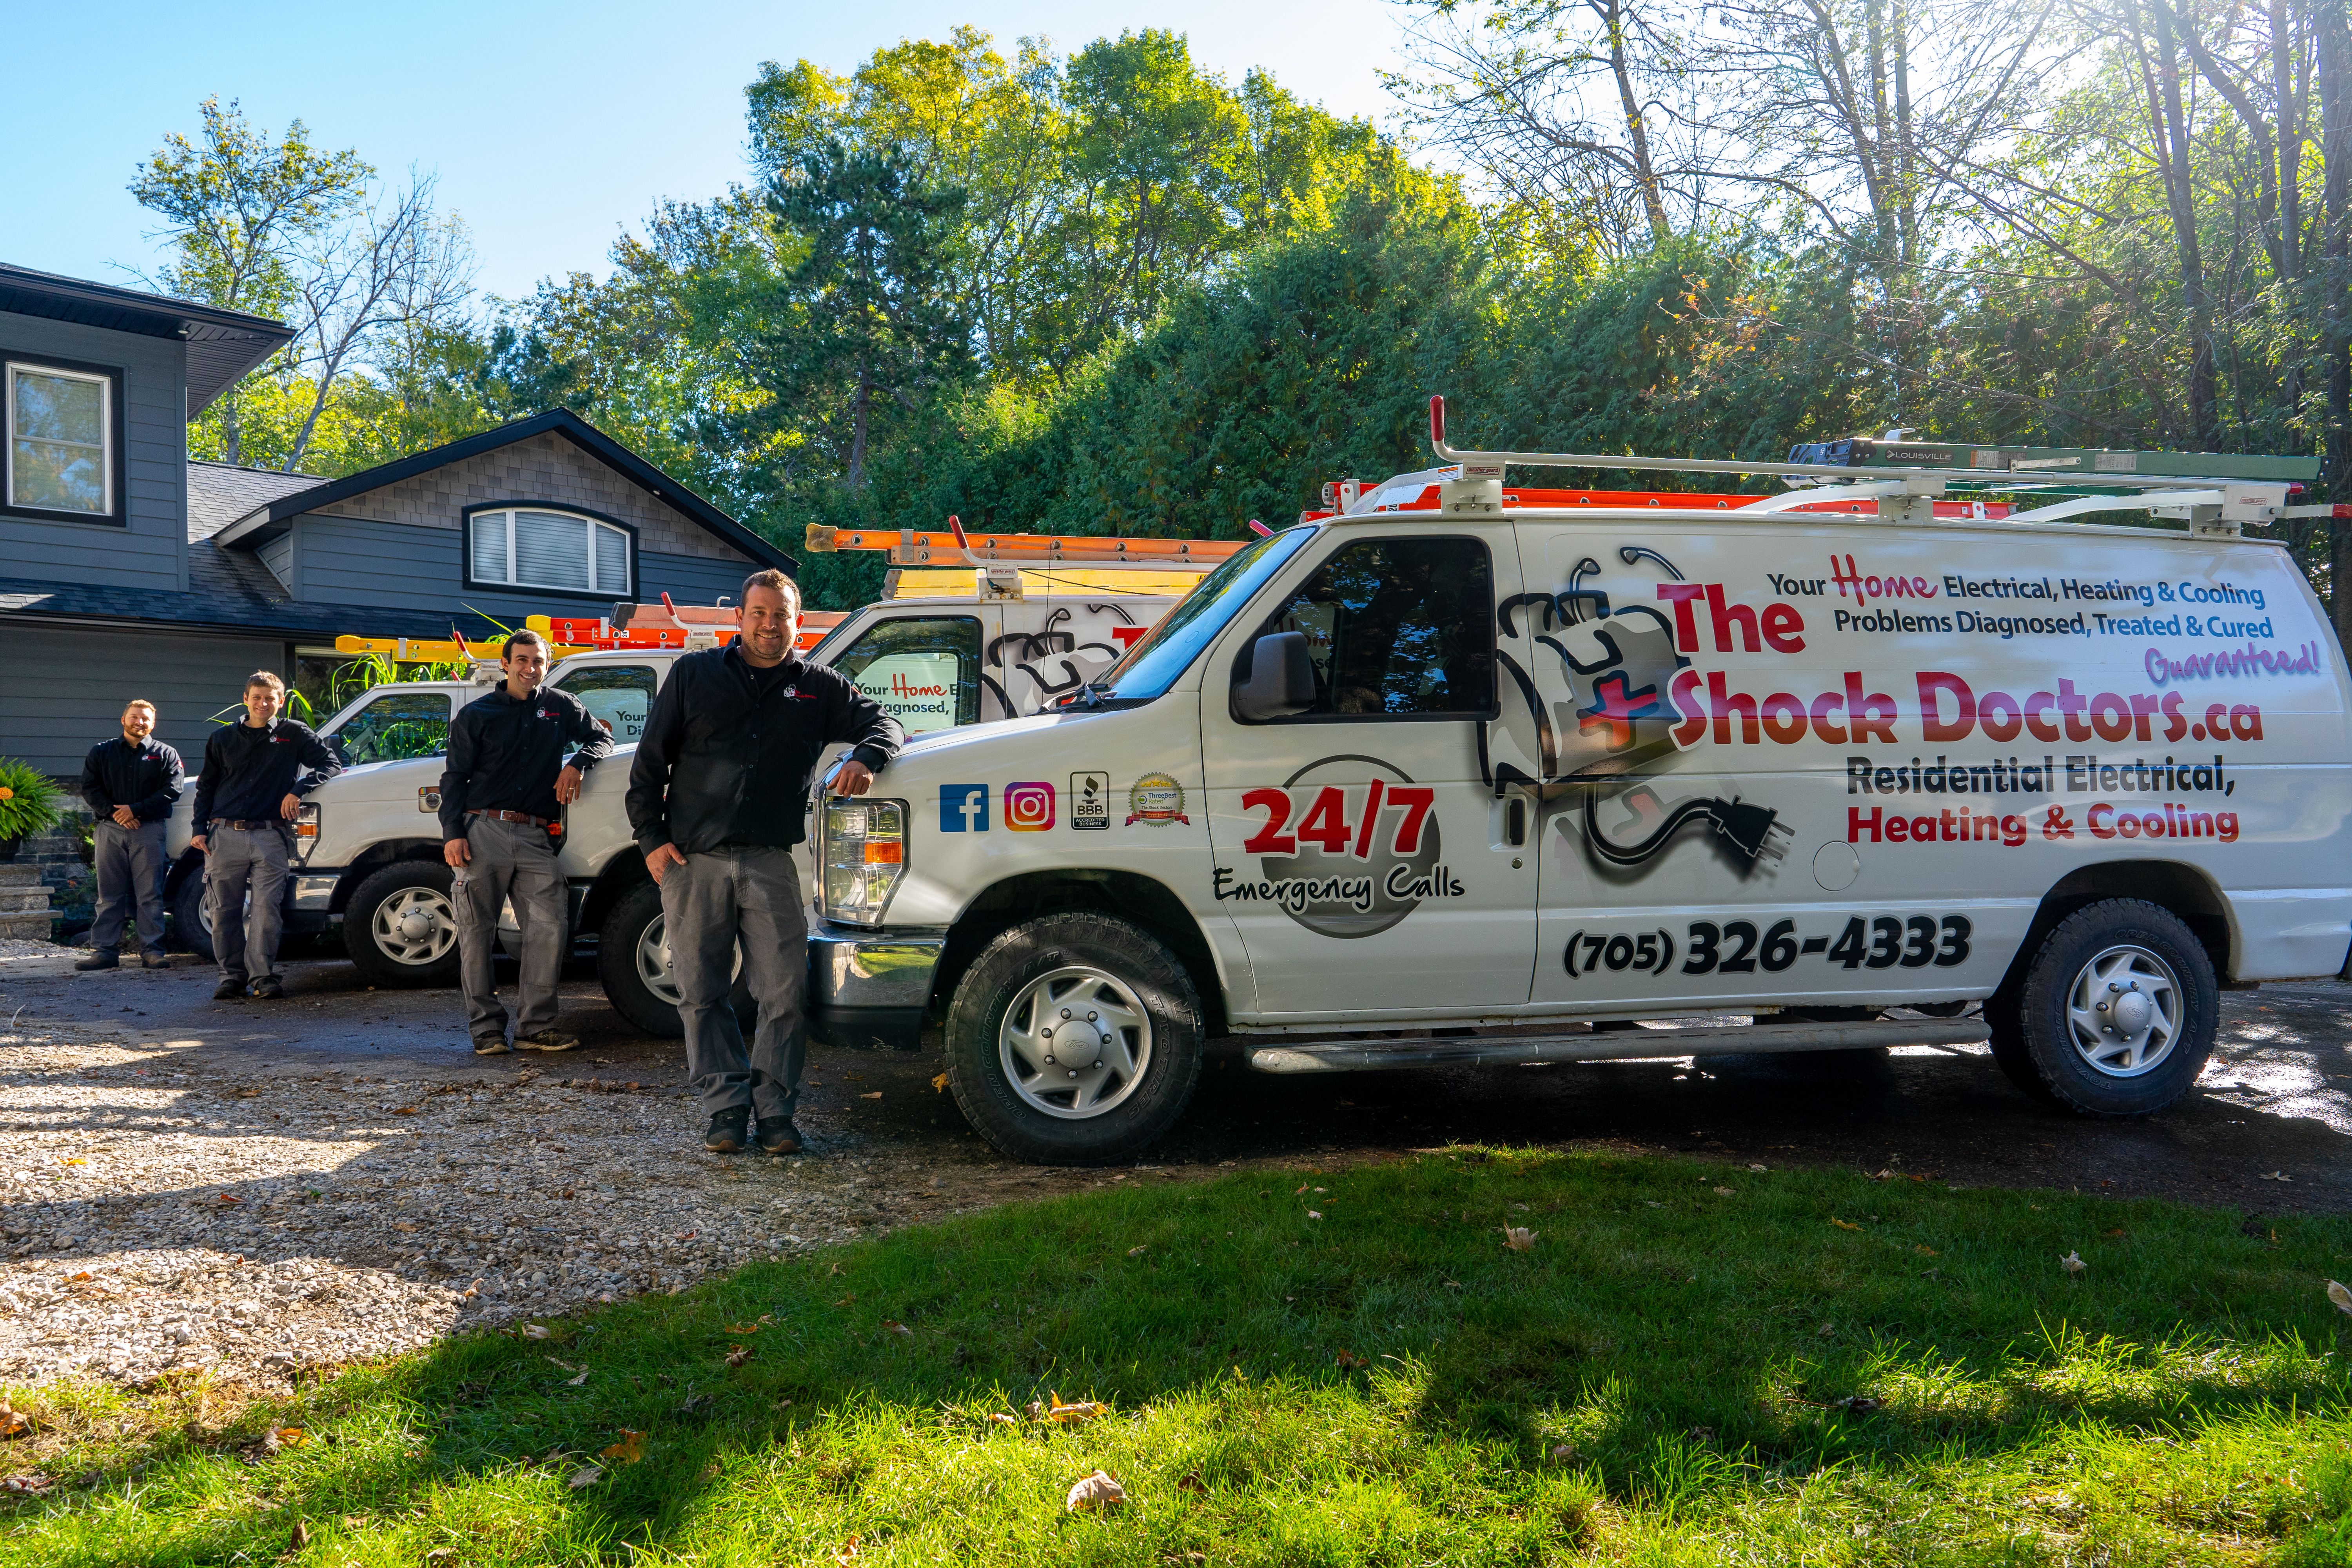 Contact The Shock Doctors today for all your electrical, heating and cooling needs